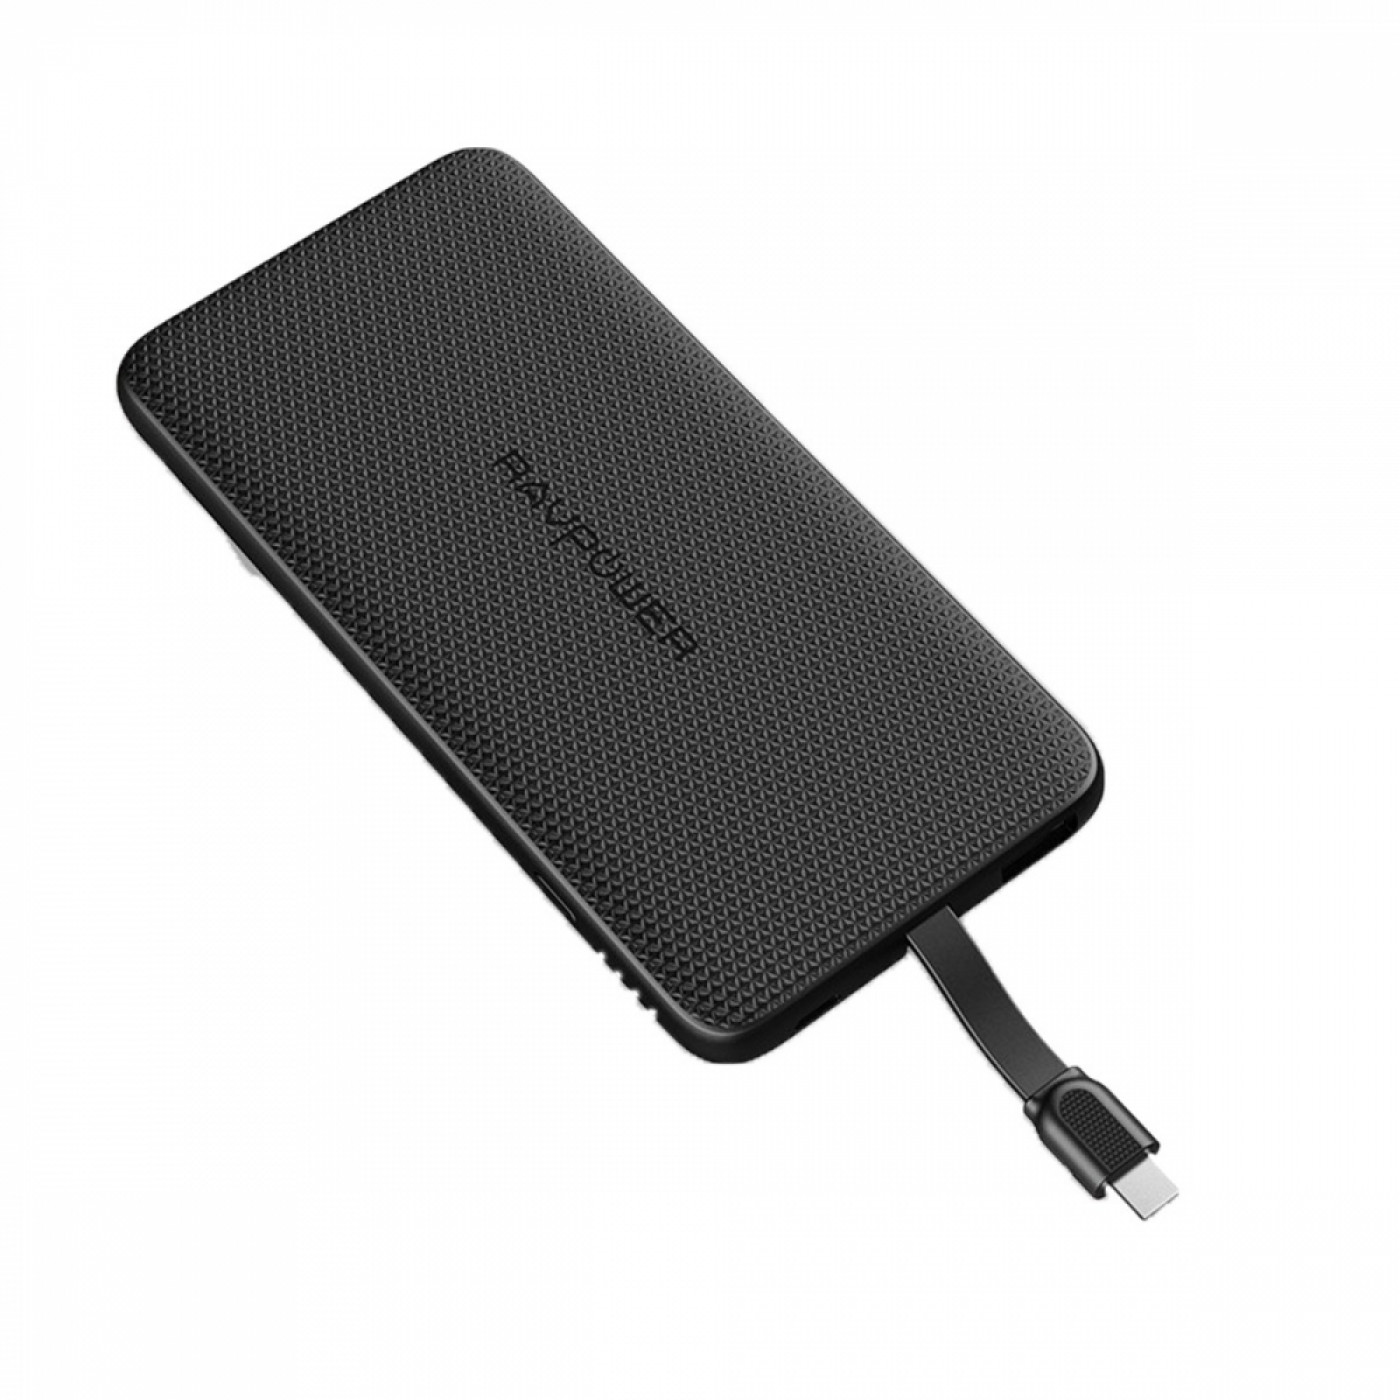 Ravpower PD Pioneer 10,000 mAh 18W 2 Port Power Bank with Built in USB ...